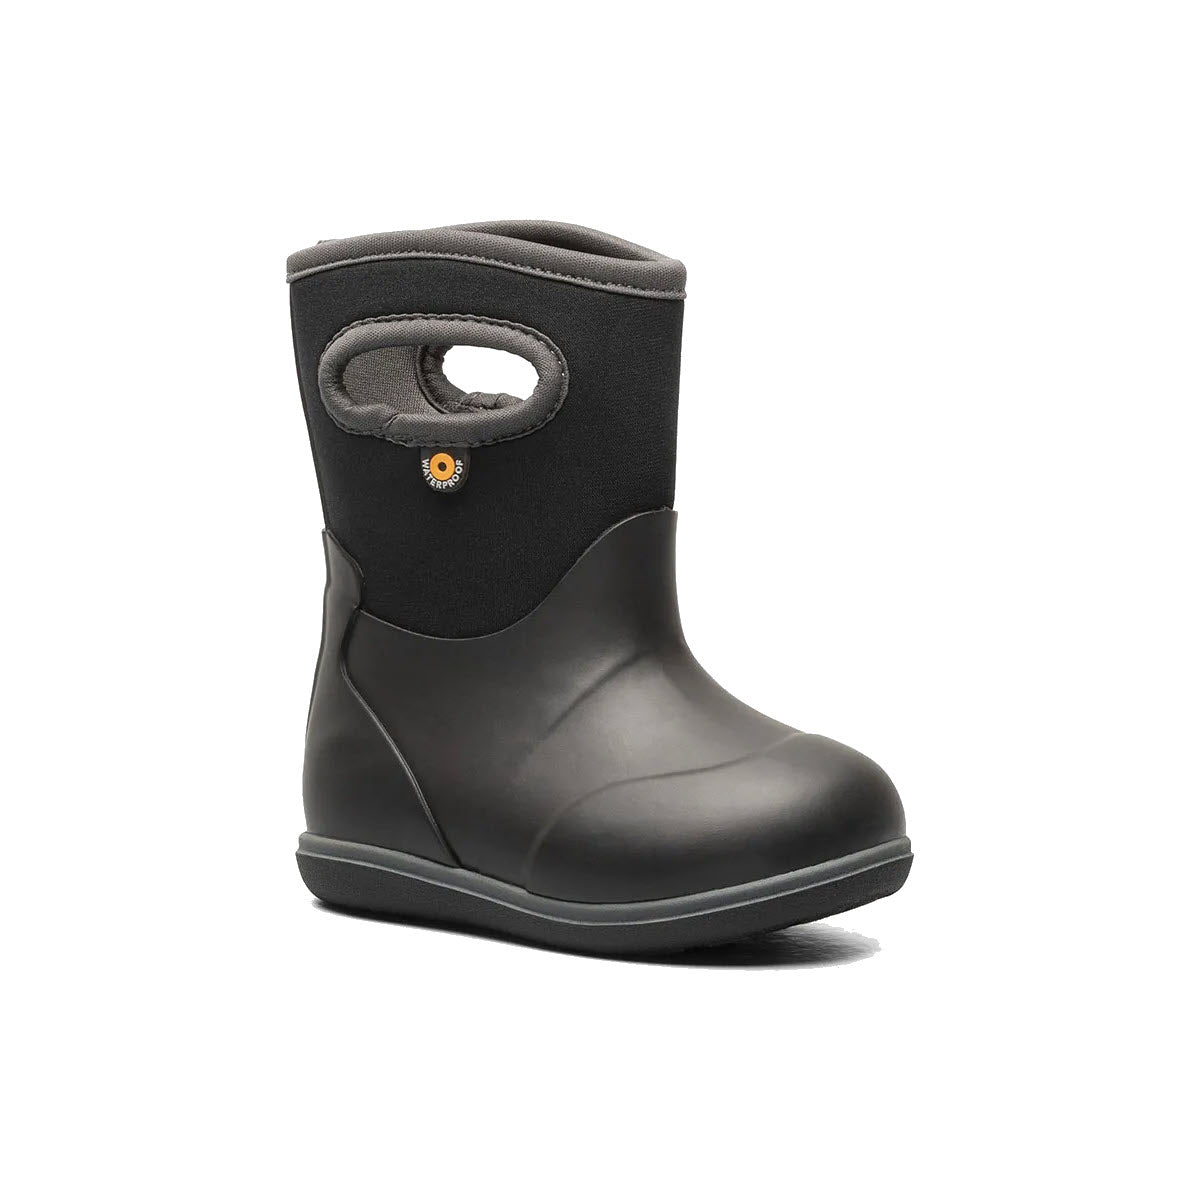 A single Bogs Baby Classic Solid Black waterproof rubber boot with a neoprene upper and a loop handle on a white background.